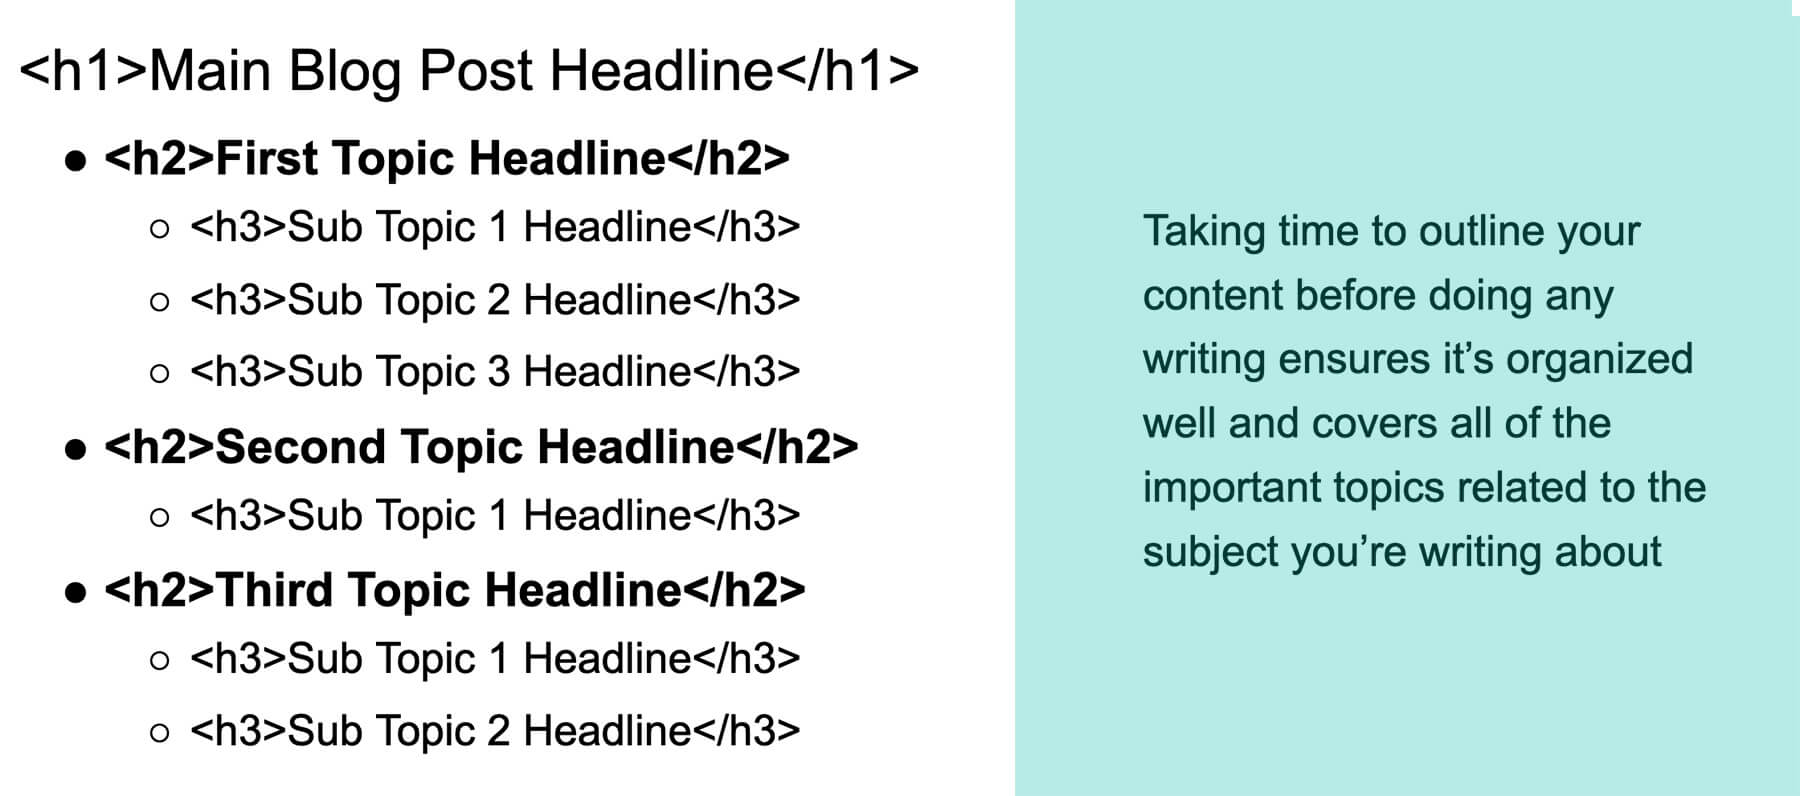 Content Outline Example